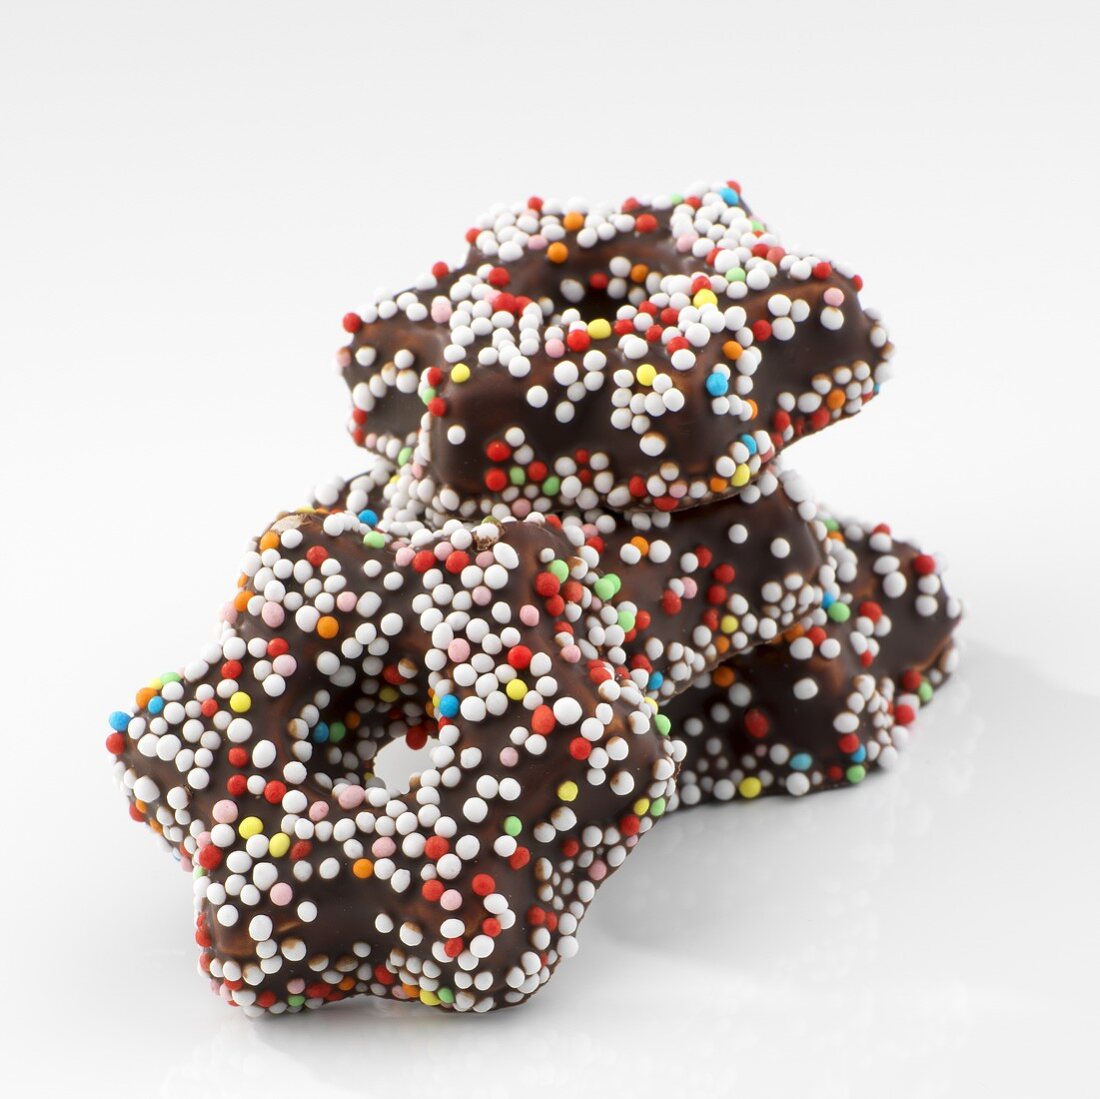 Chocolate stars with coloured sprinkles